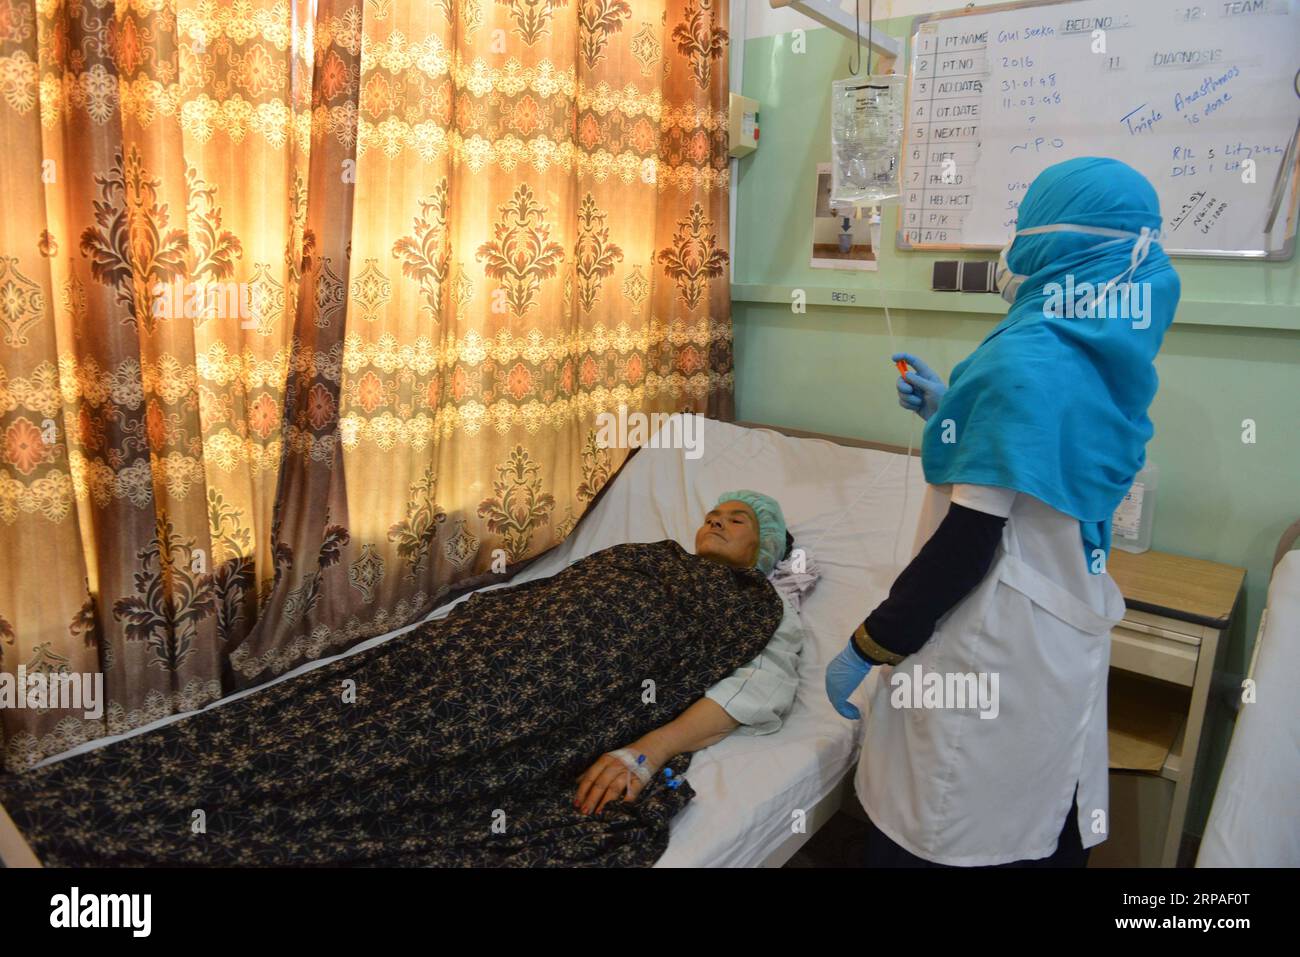 (190507) -- KANDAHAR, May 7, 2019 -- An Afghan woman receives medical treatment at the Mirwais Regional Hospital in Kandahar, Afghanistan, May 4, 2019. The Mirwais Regional Hospital, locally known as the Chinese Hospital , was built by China in 1974 and put into operation in 1979 on 44 acres of land in Kandahar, the largest city in the southern region as a gift to the Afghan people. The hospital is the largest health center in Afghanistan s southern region and provides almost all kinds of services to patients ranging from diagnosis of diseases to surgery of war victims, childcare and maternity Stock Photo